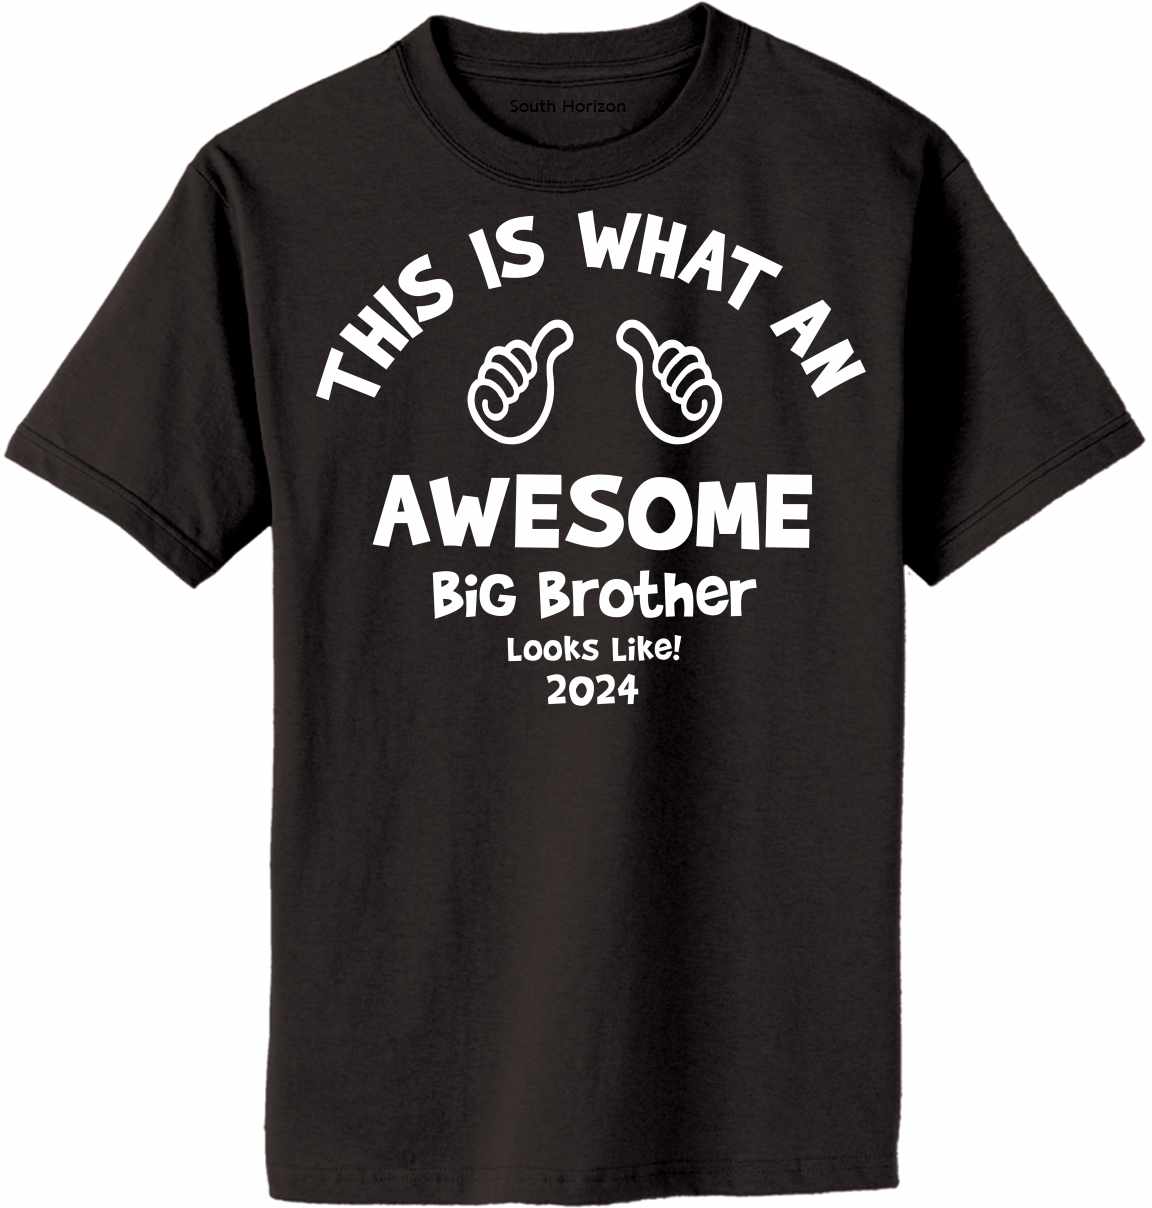 Awesome Big Brother in 2024 on Adult T-Shirt